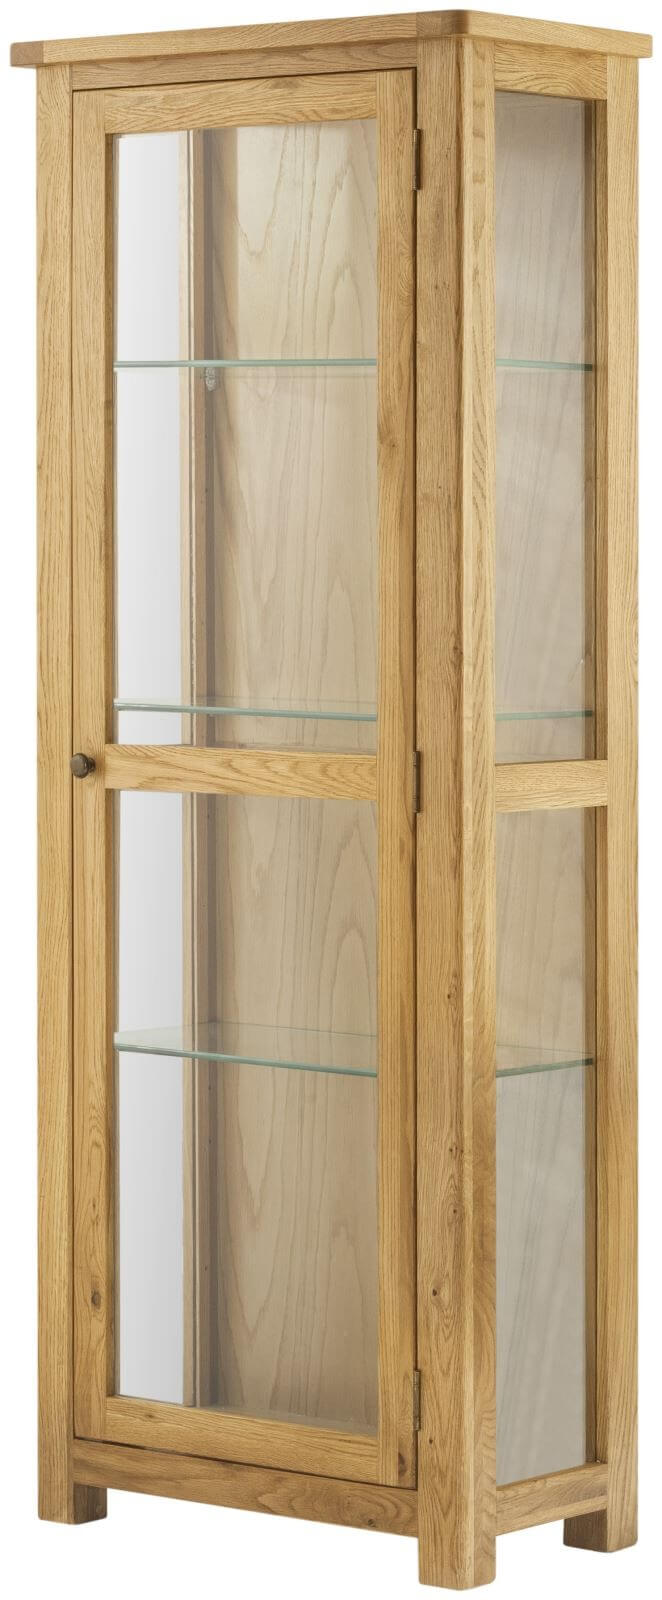 Showing image for Seattle glazed display cabinet